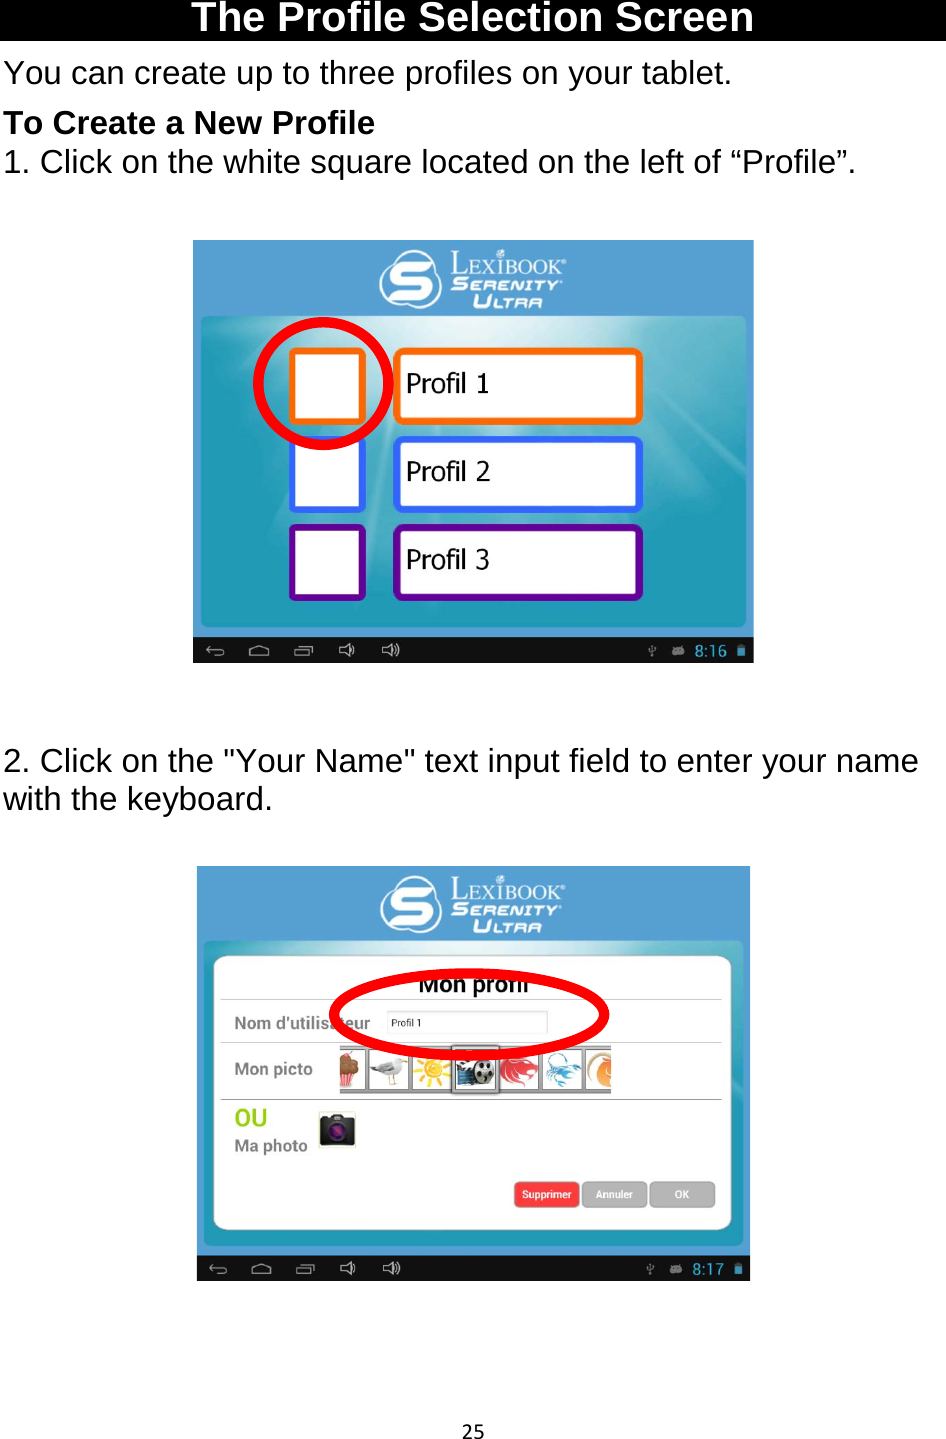 25  The Profile Selection Screen You can create up to three profiles on your tablet.  To Create a New Profile 1. Click on the white square located on the left of “Profile”.    2. Click on the &quot;Your Name&quot; text input field to enter your name with the keyboard.    